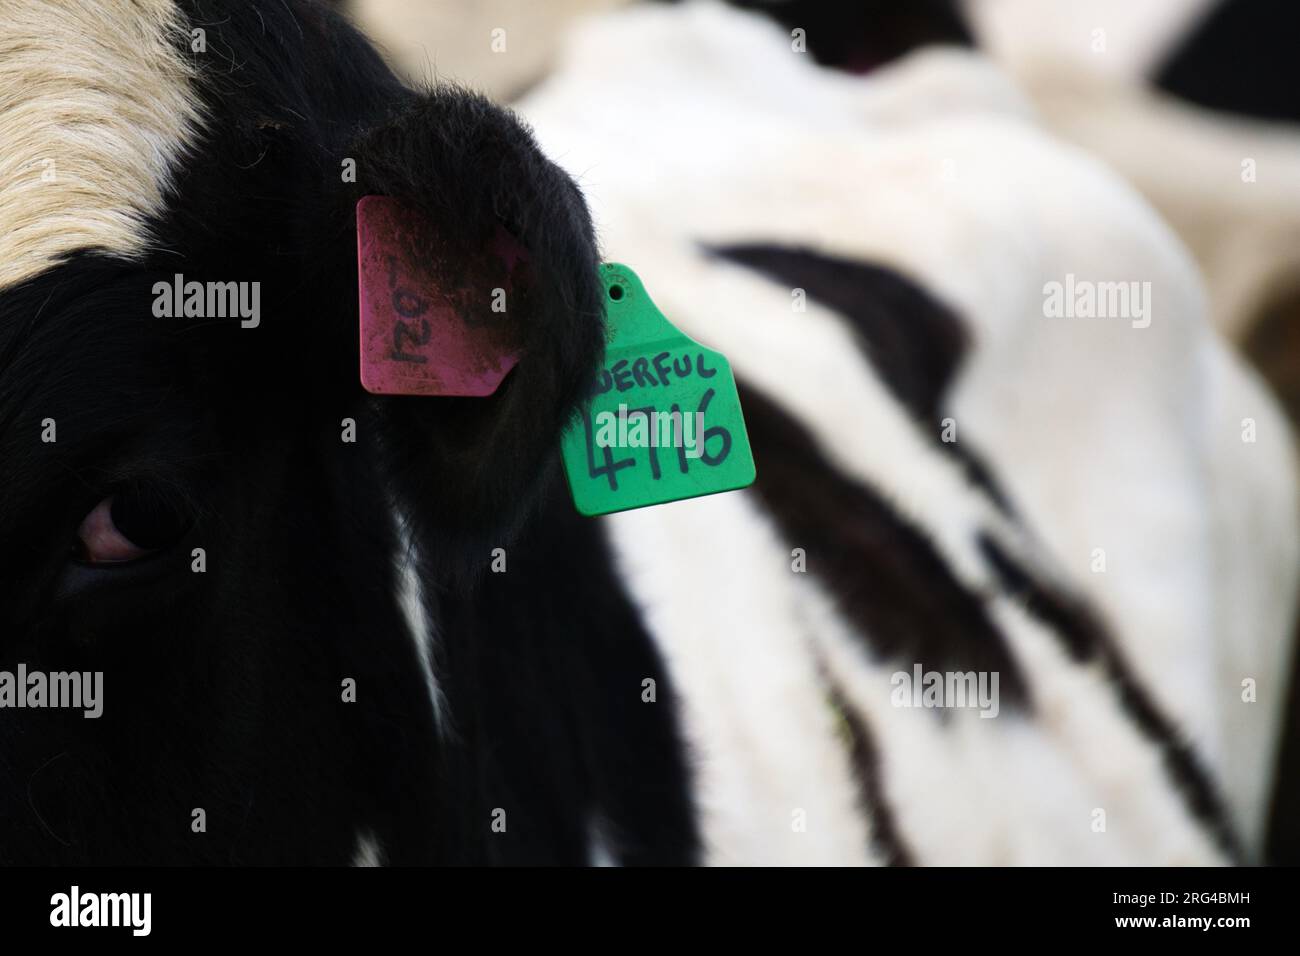 Close of Purple and Green Dewlap LIvestock Identification Ear Tags attached to the ear of Holstein Friesian Dairy Cow Stock Photo